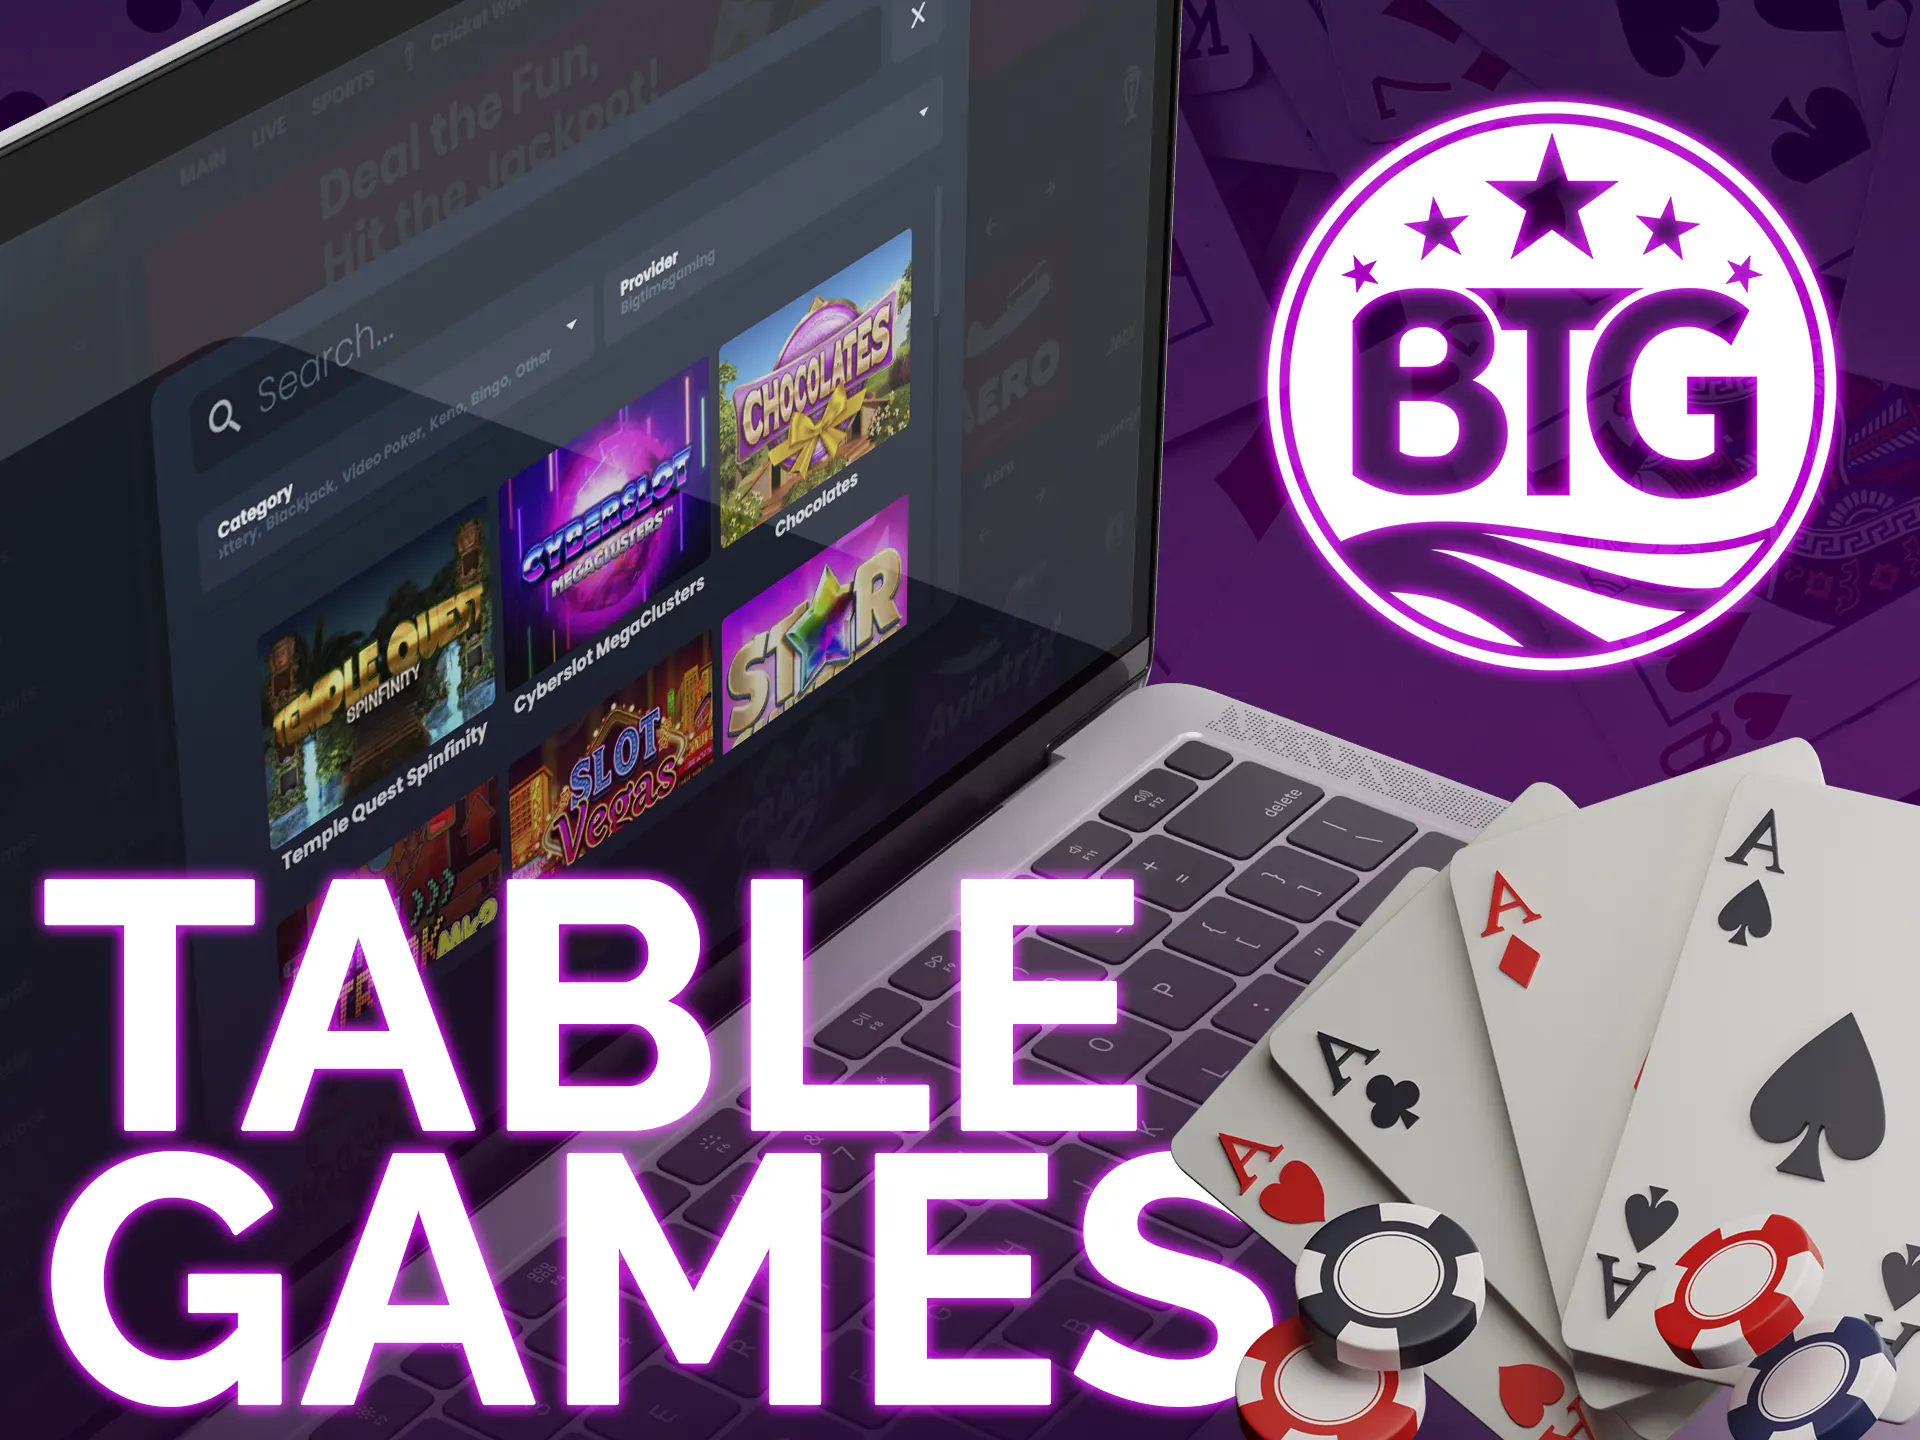 Big Time Gaming offers table games, including Blackjack and diverse roulette and lotteries options.